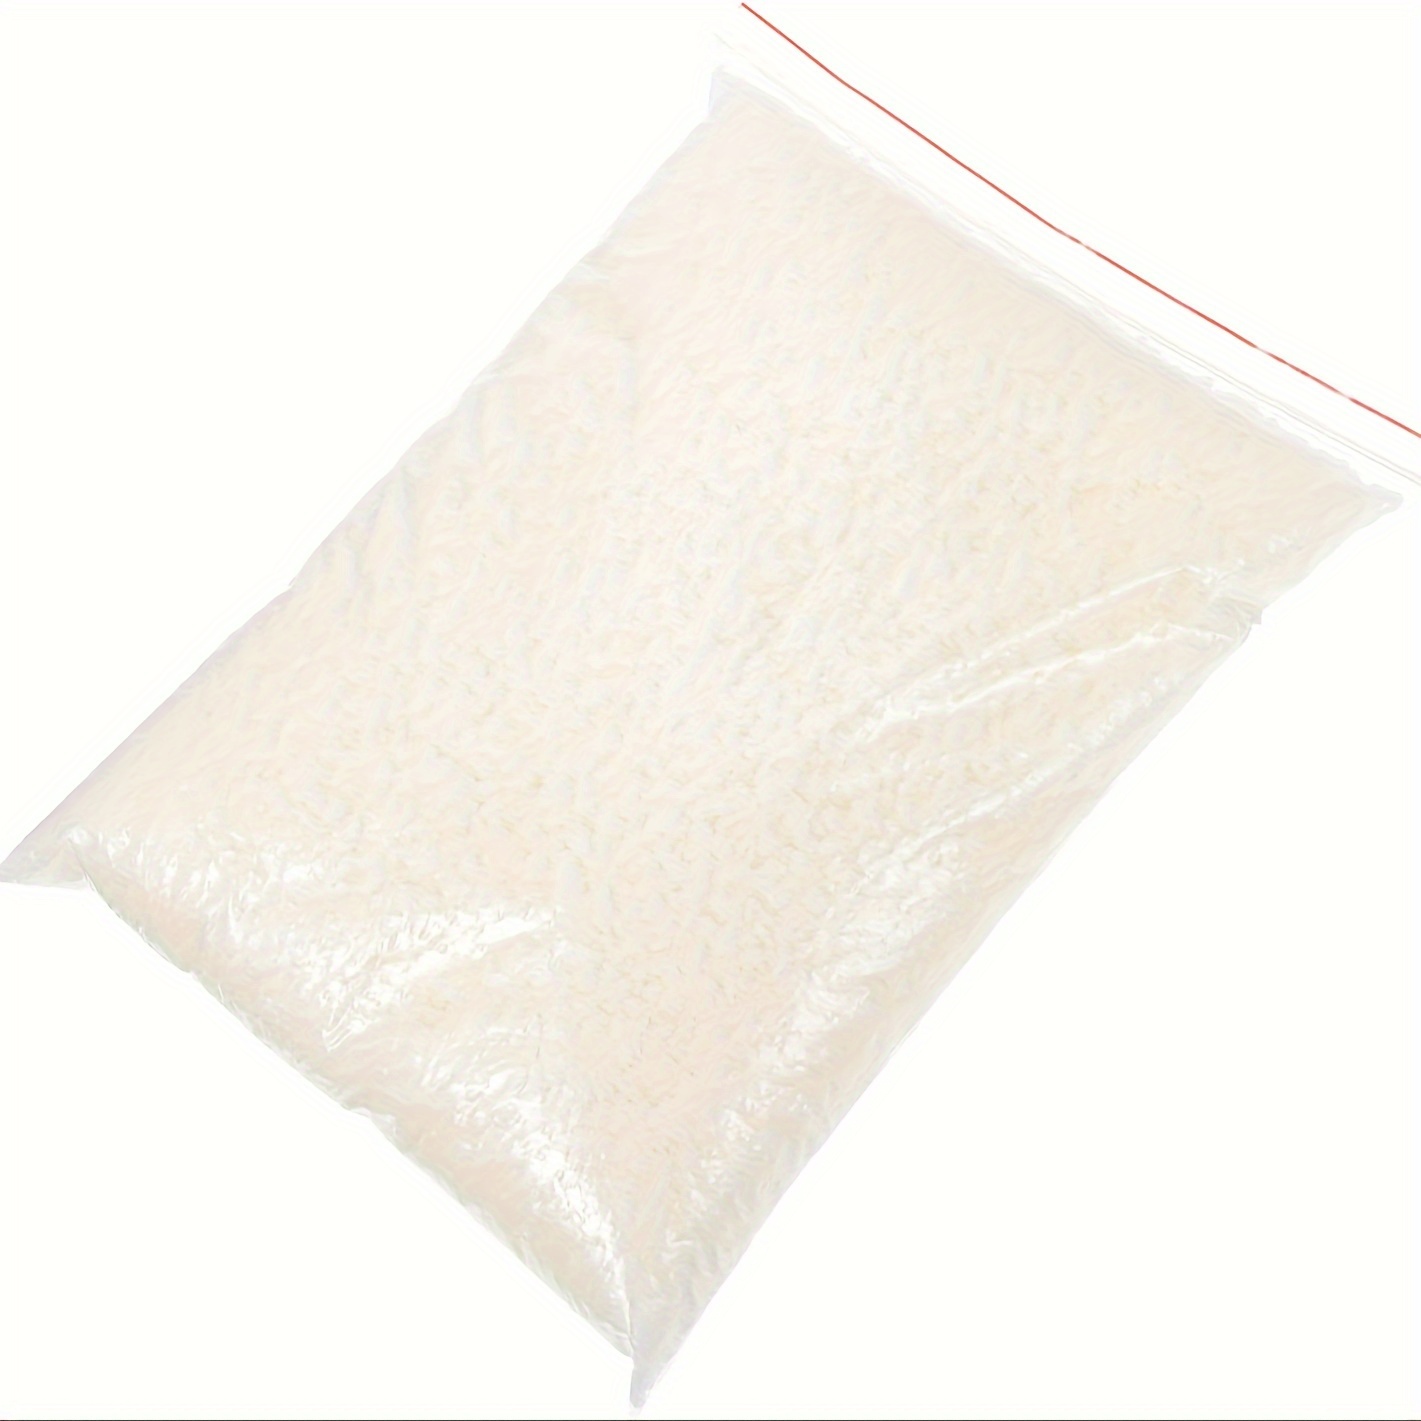 White Cosmetic Raw Materials Paraffin Wax, For Candle Making